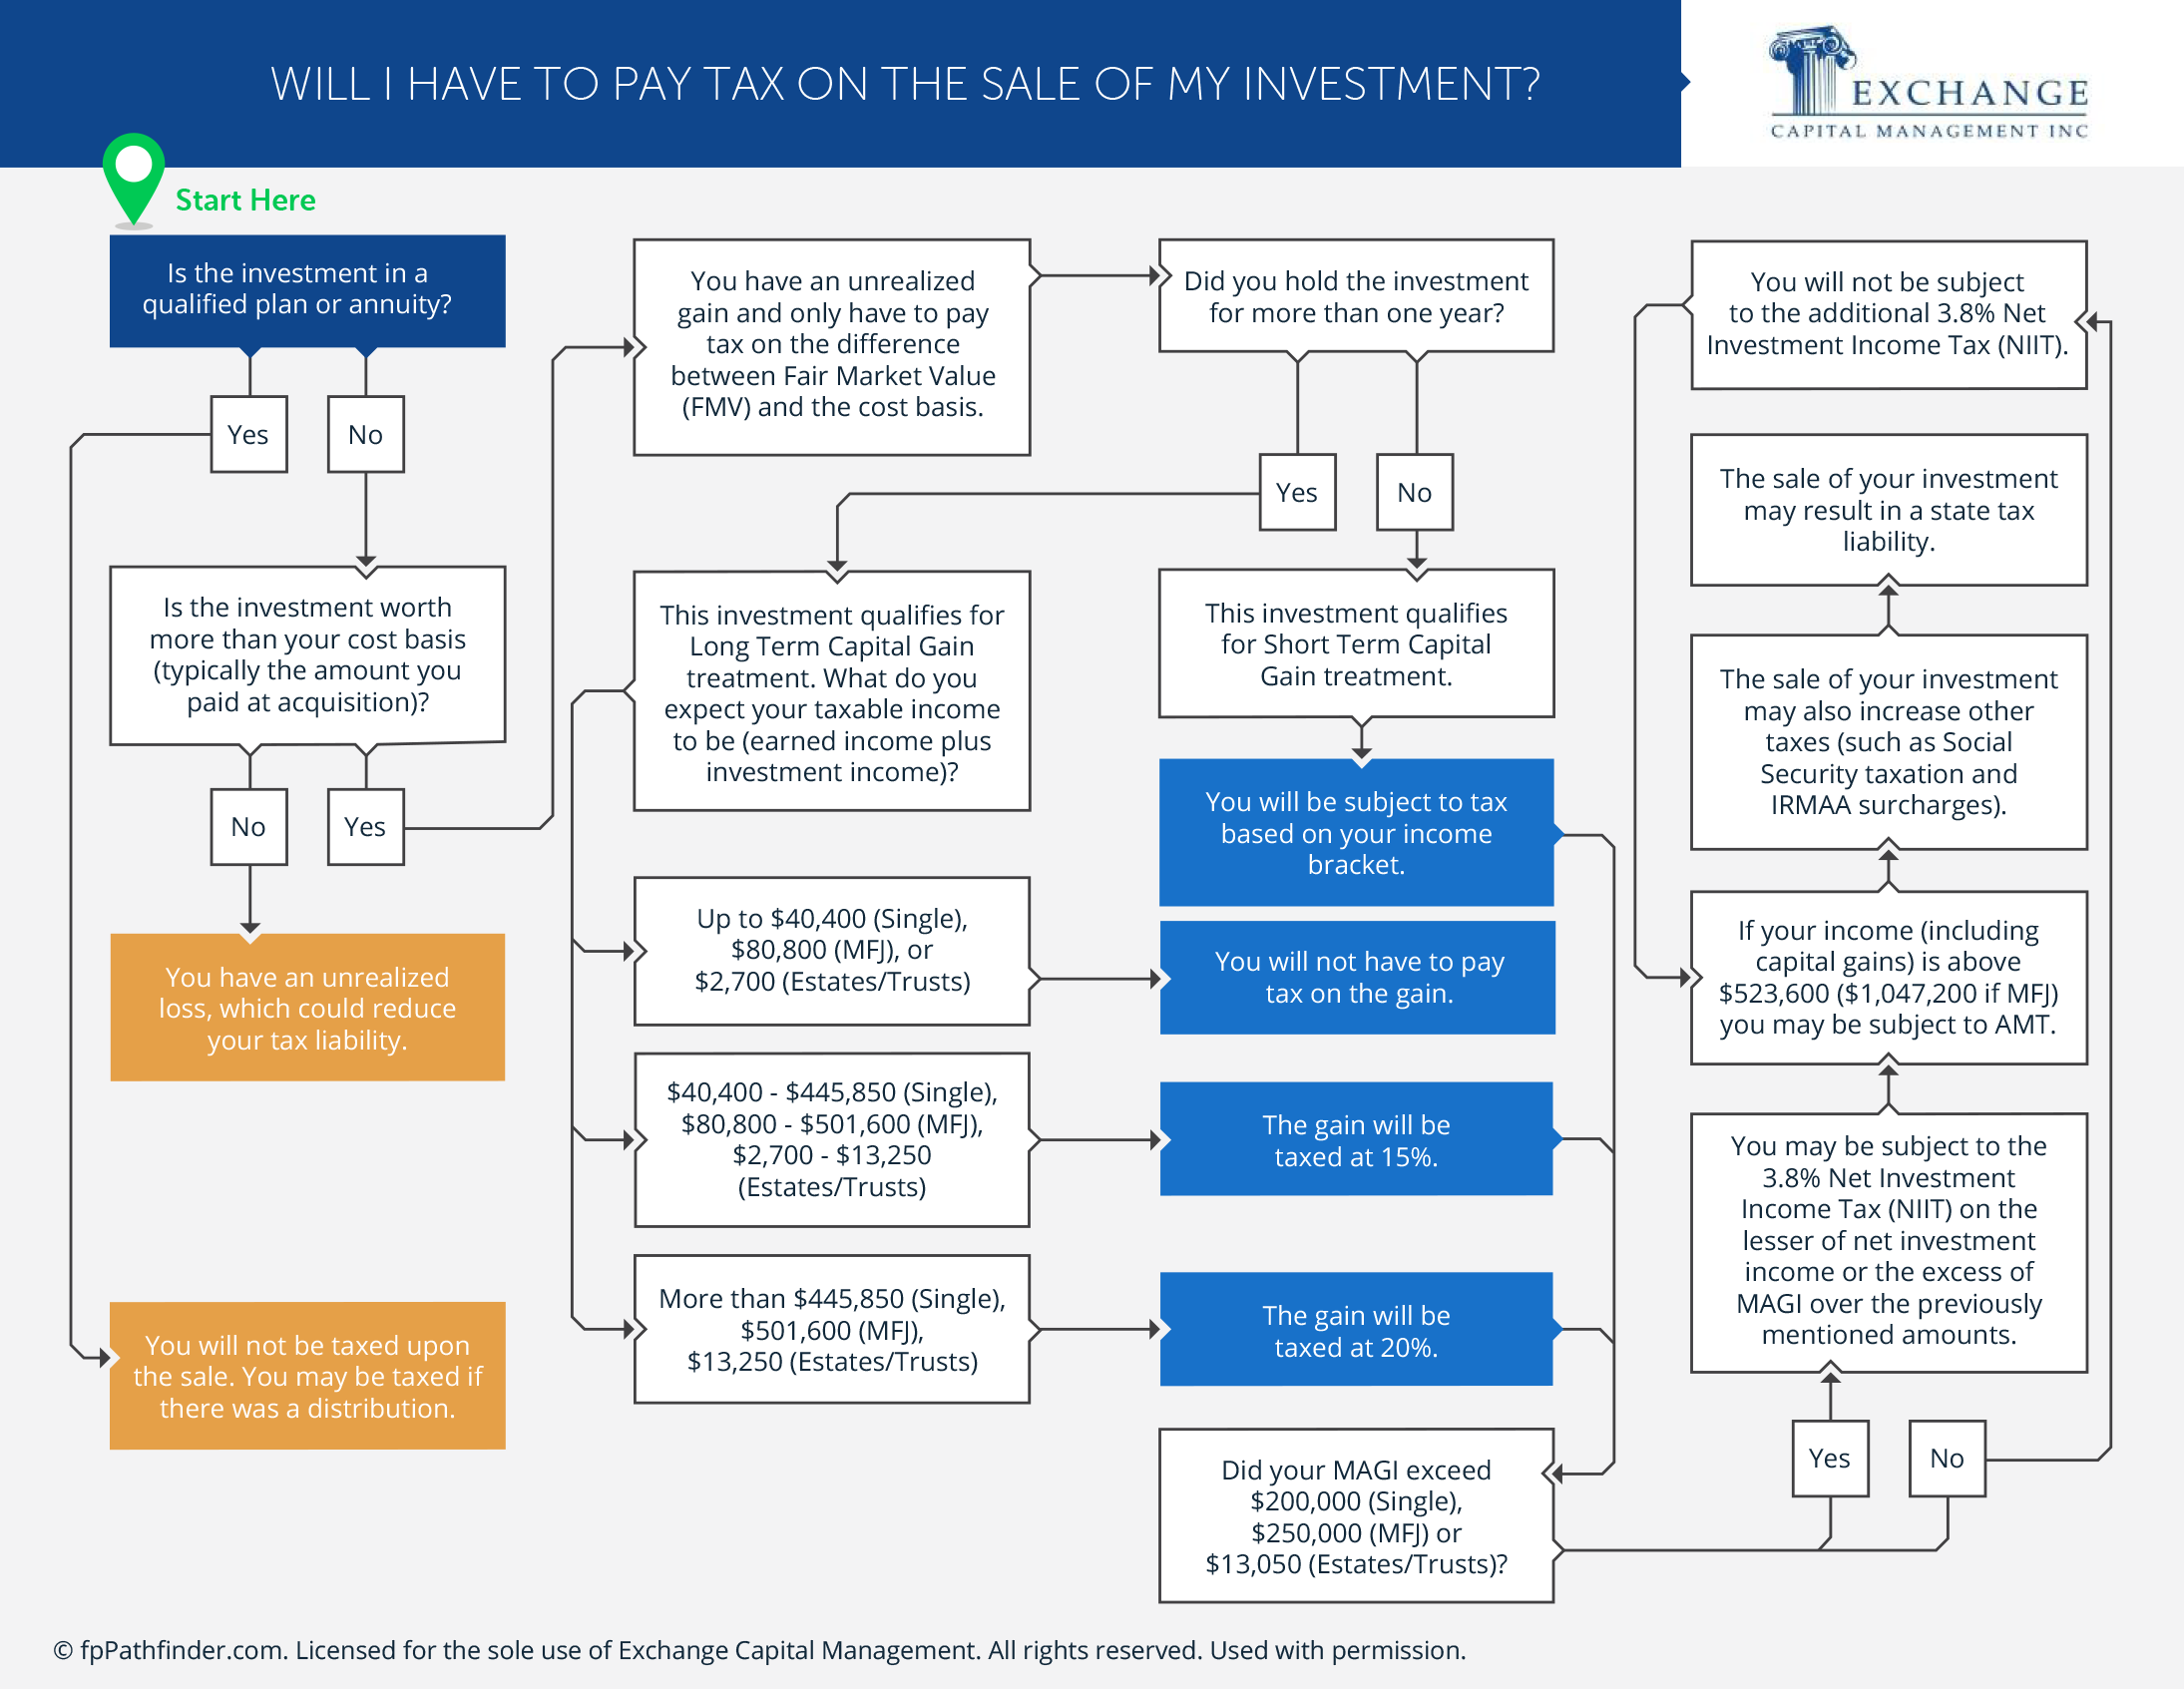 Will I Have to Pay Tax on the Sale of My Investment?